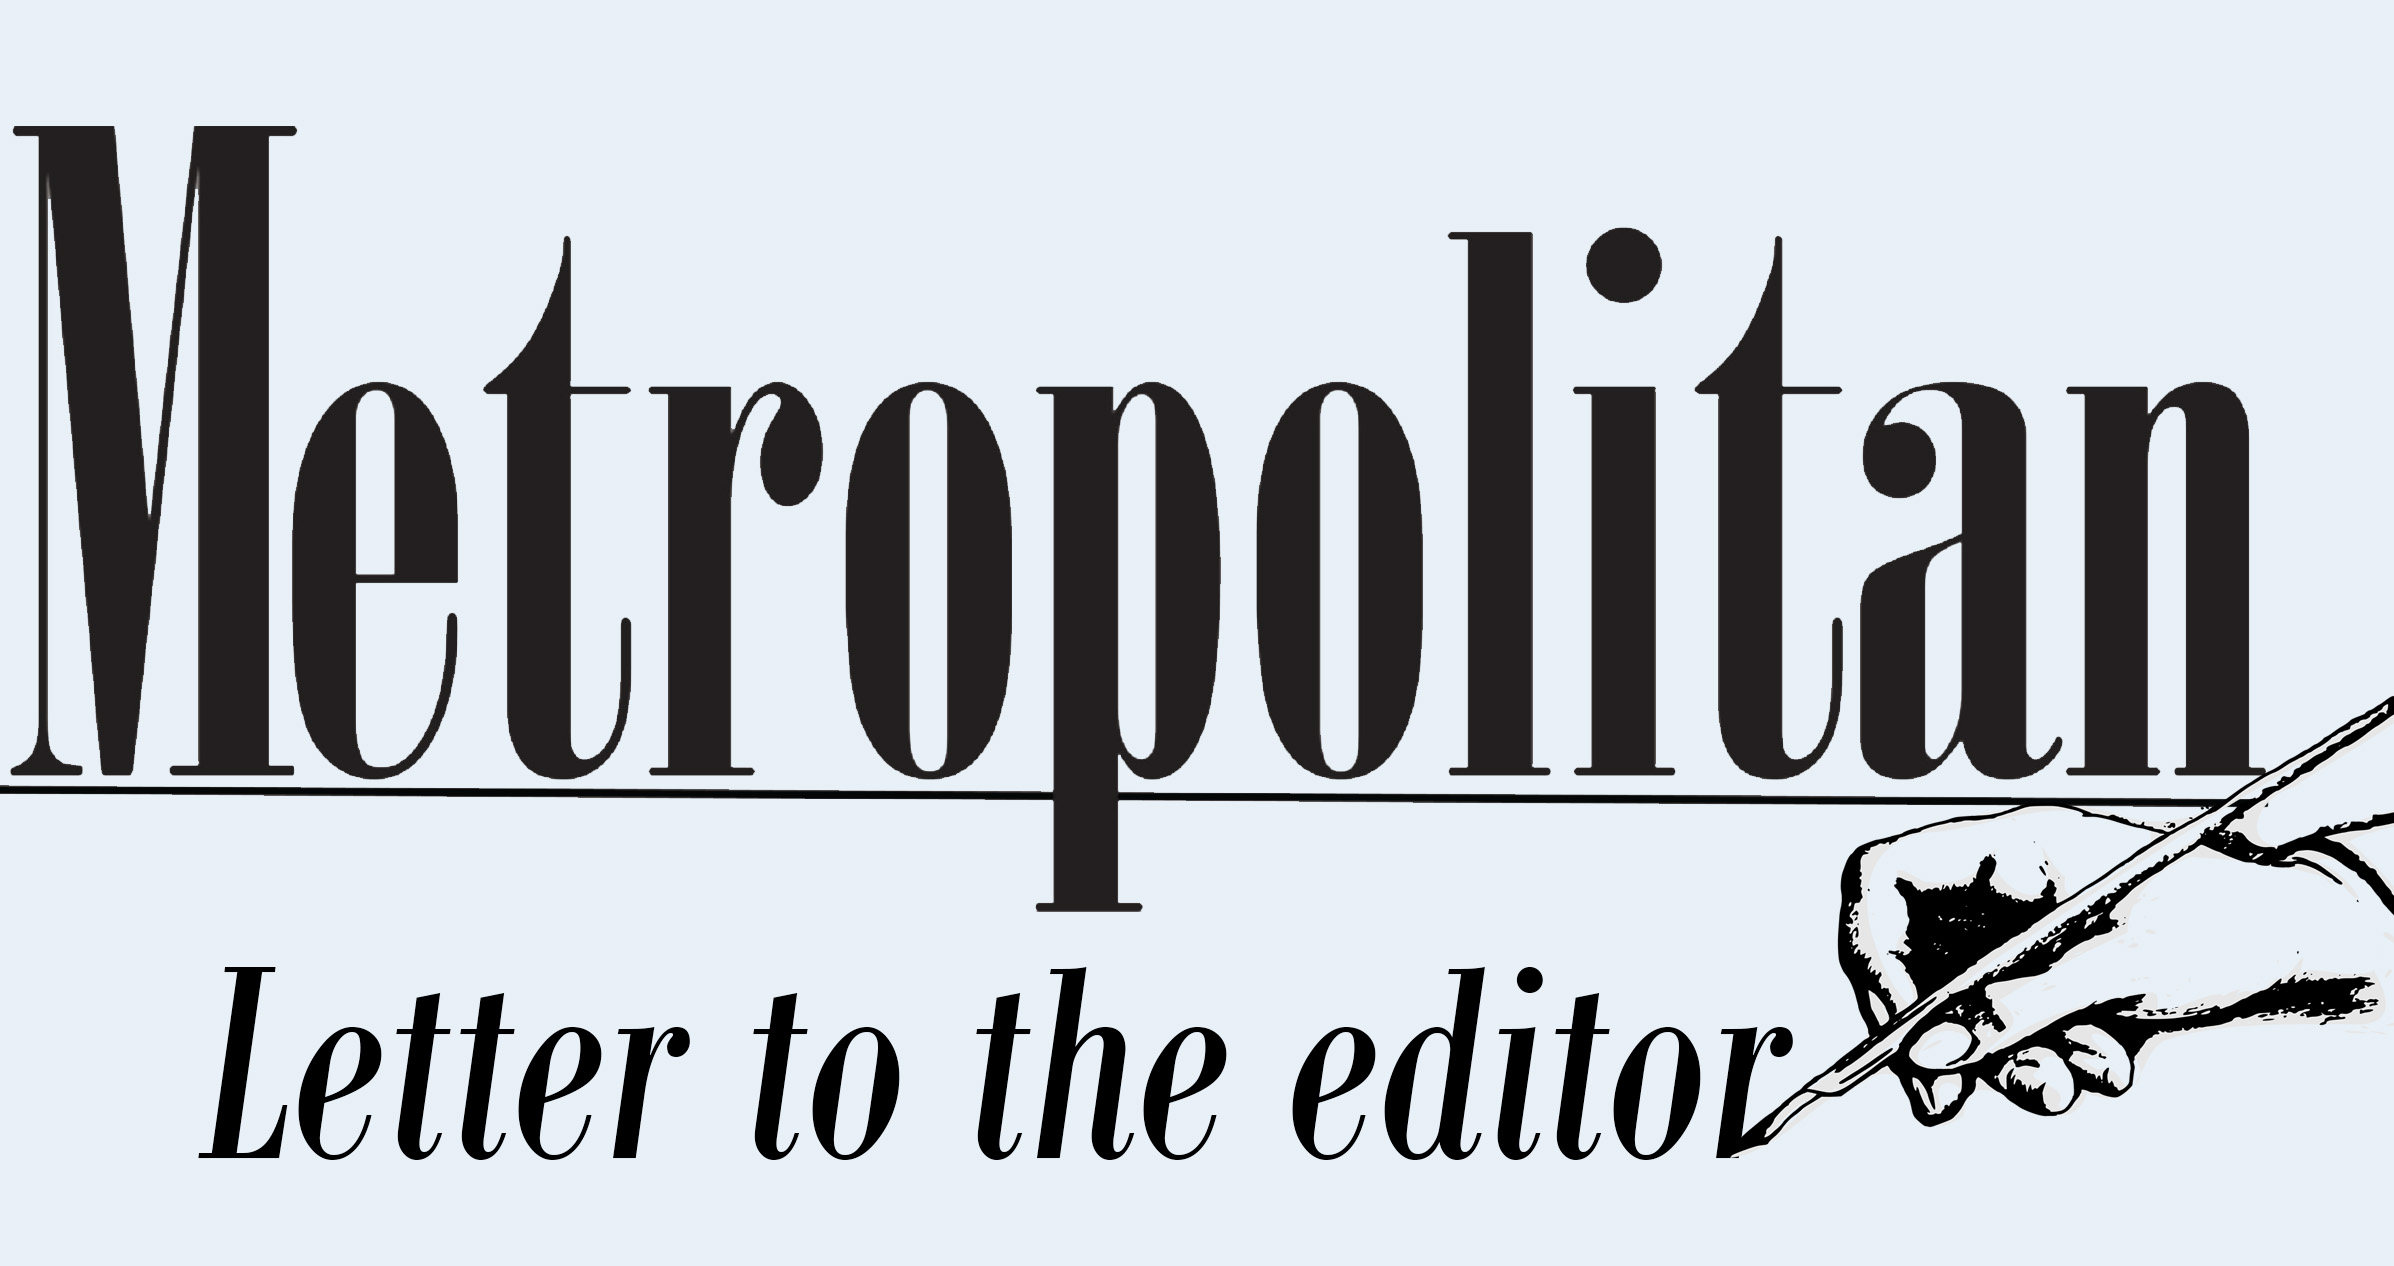 You are currently viewing Letter to the editor: Let the third parties participate